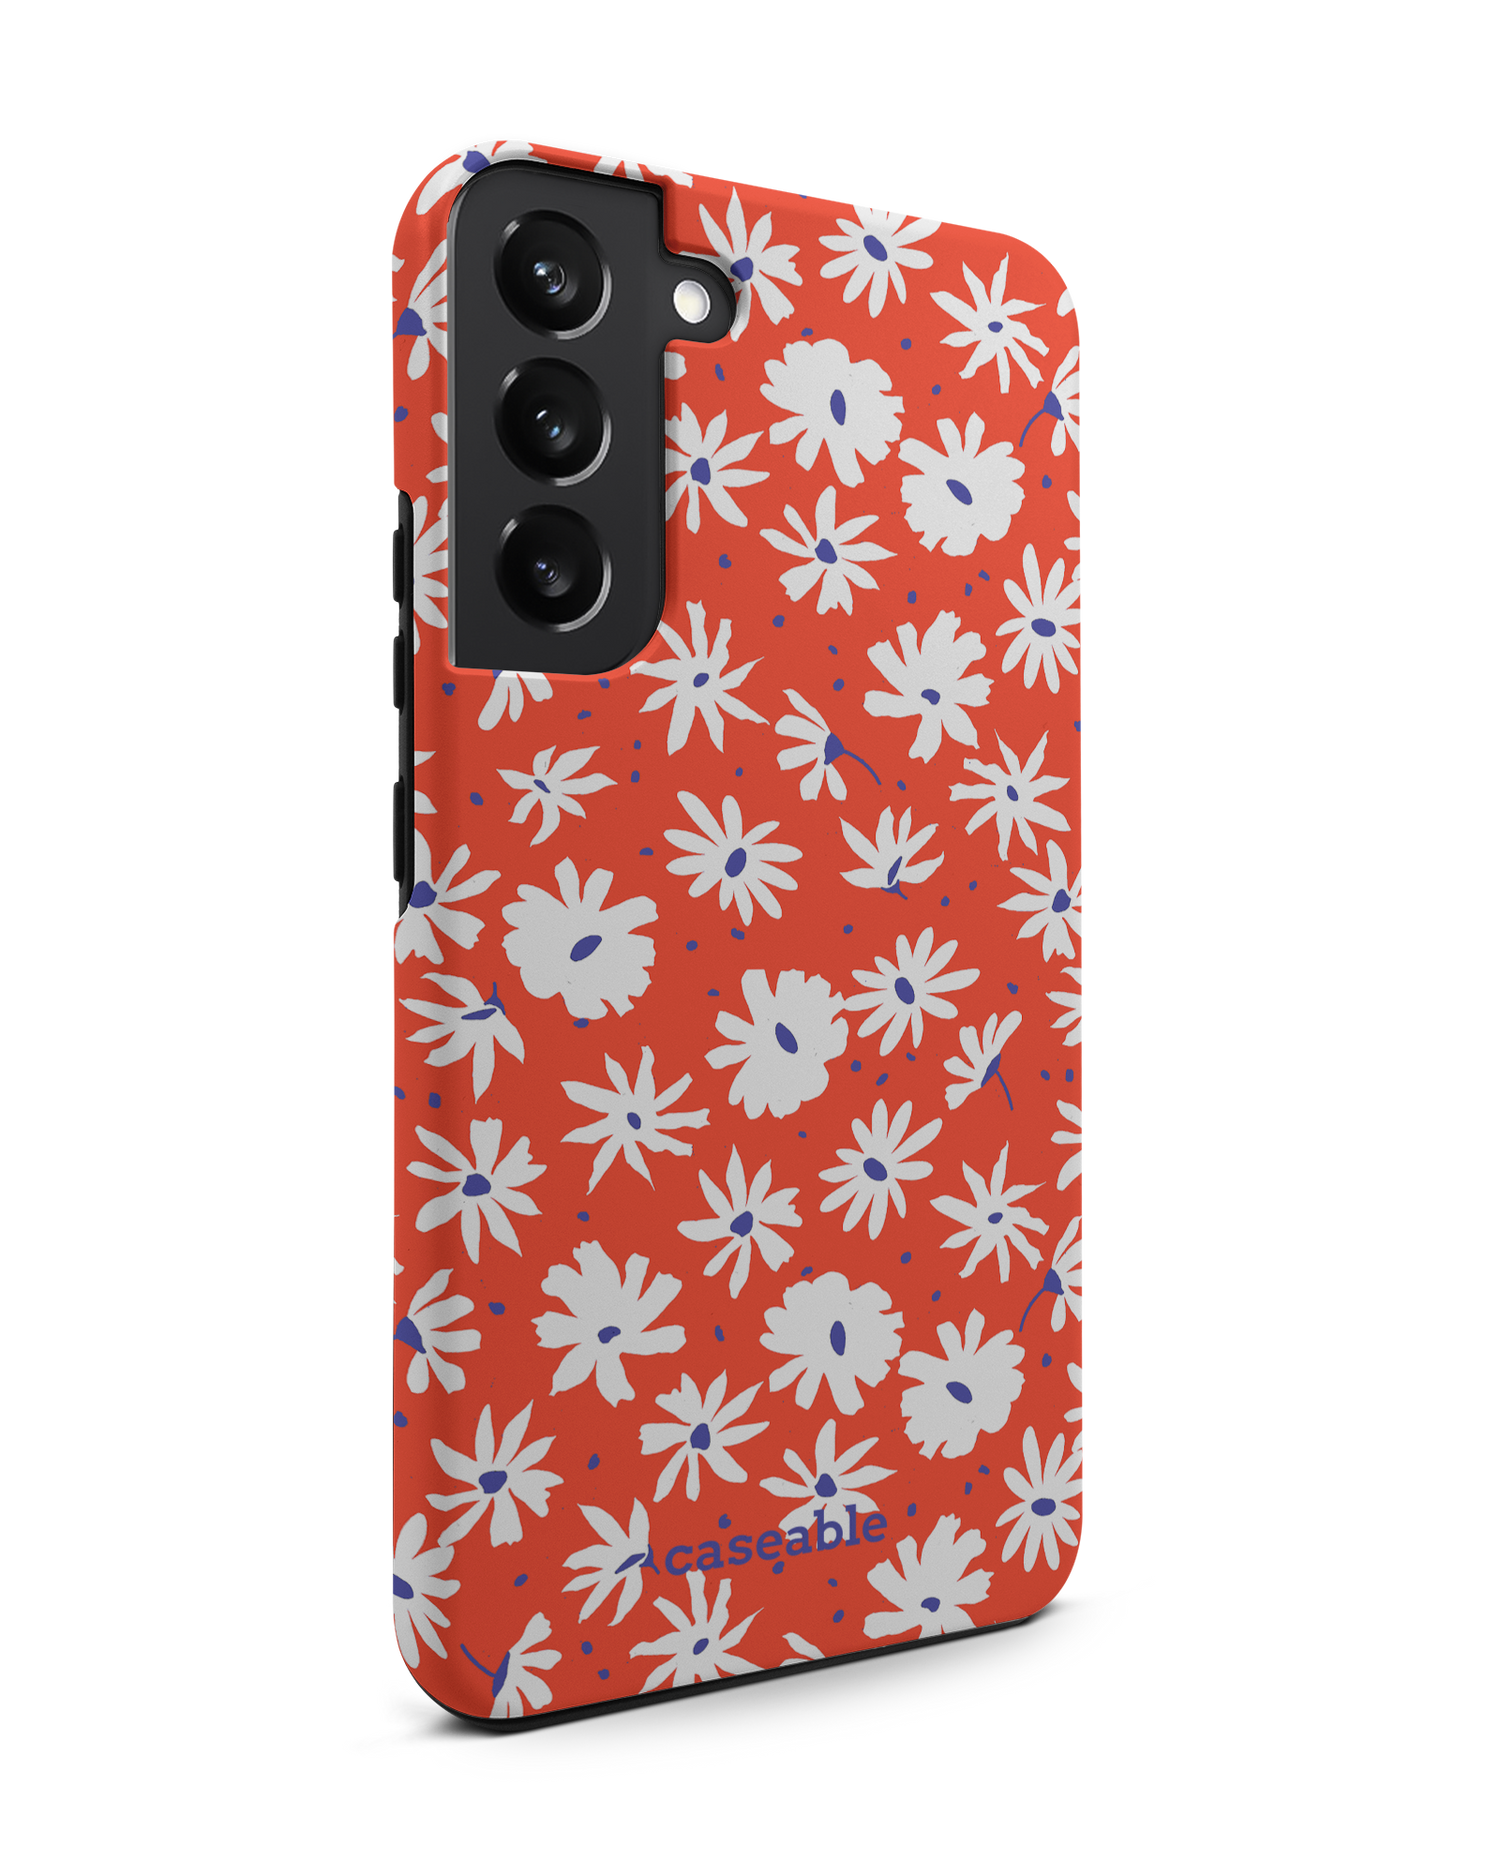 Retro Daisy Premium Phone Case Samsung Galaxy S22 Plus 5G: View from the left side